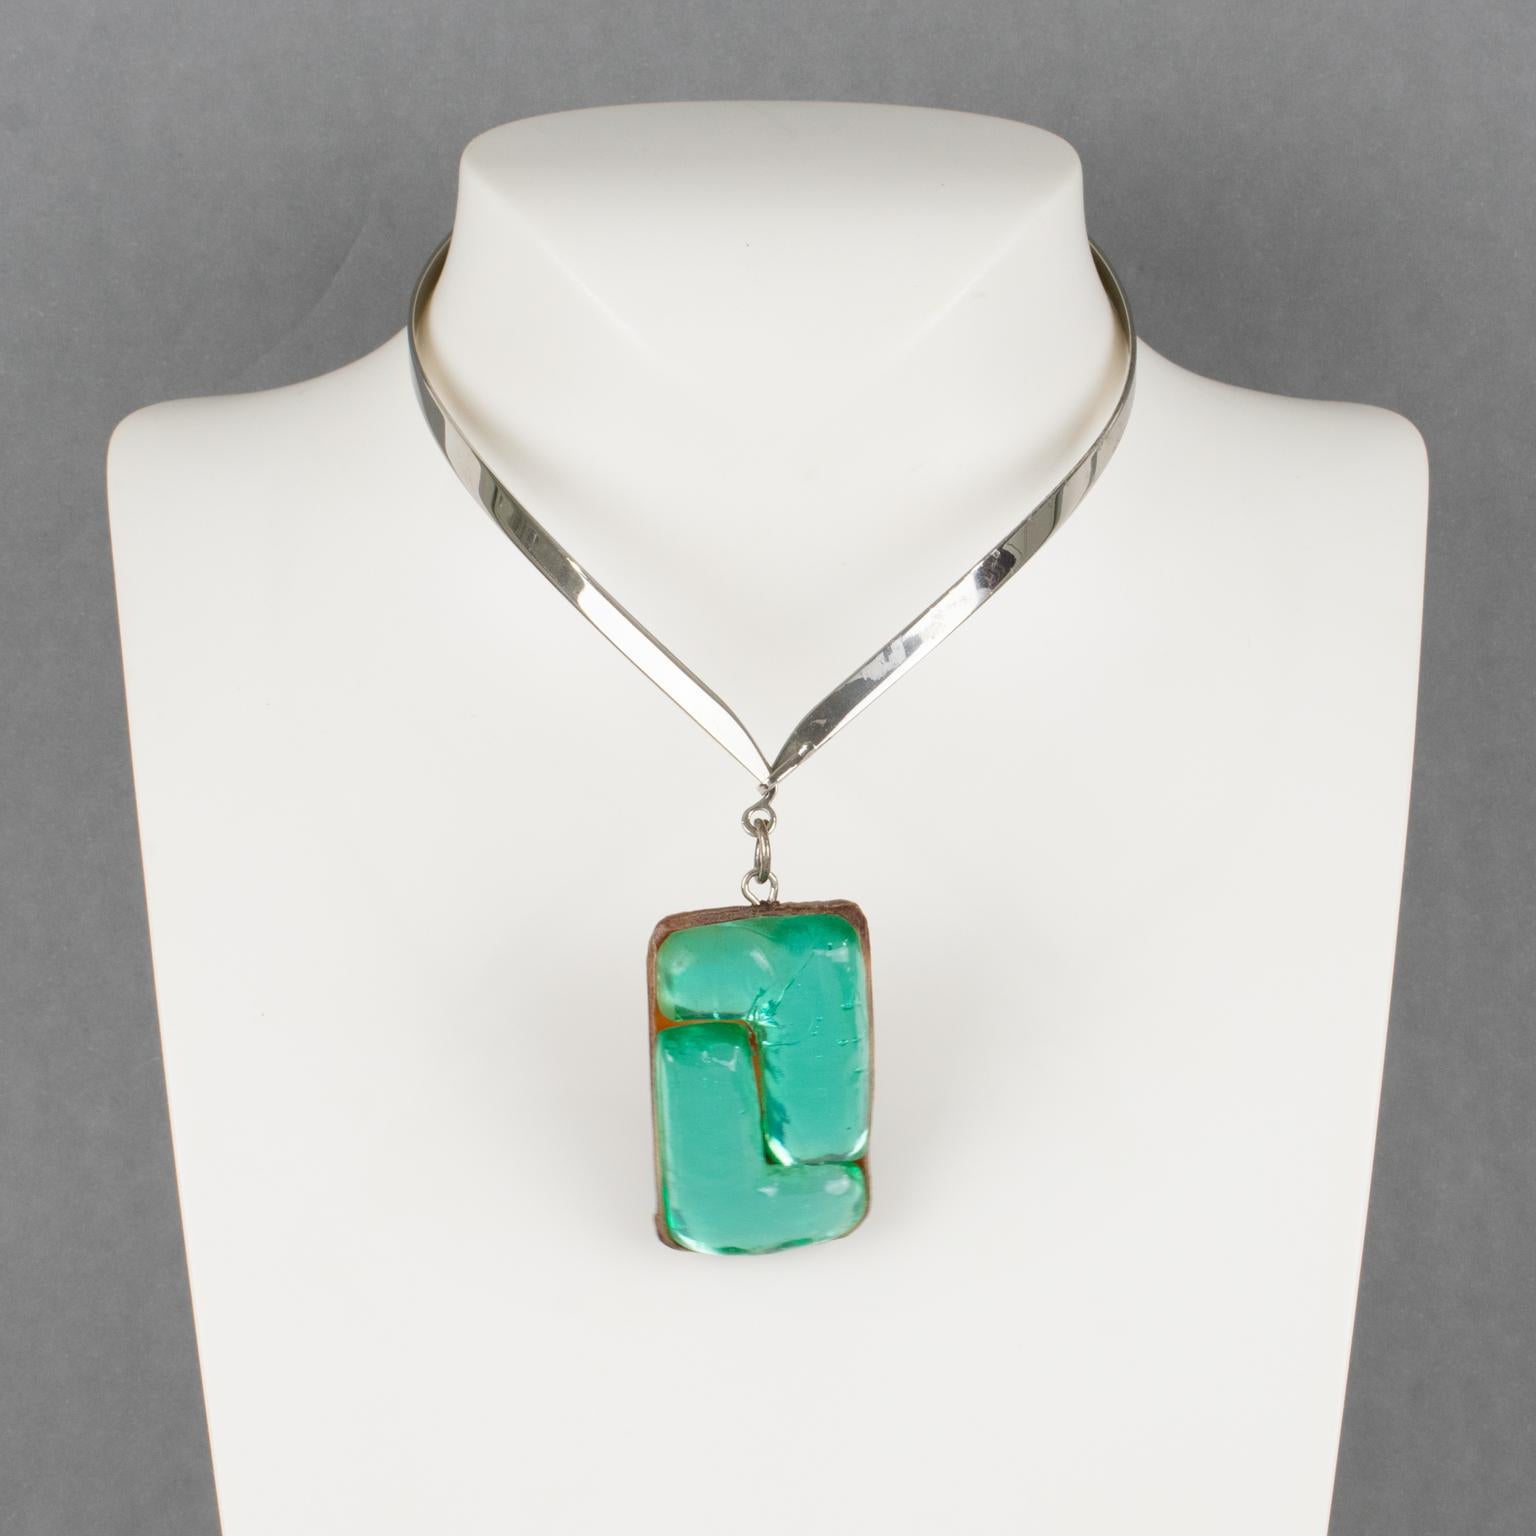 This stunning French Jewelry Designer Monique Vedie Paris choker necklace features a dimensional around-the-neck rigid chromed metal link ornate with a turquoise green modernist talosel pendant over brown background resin. Monique Vedie's vintage